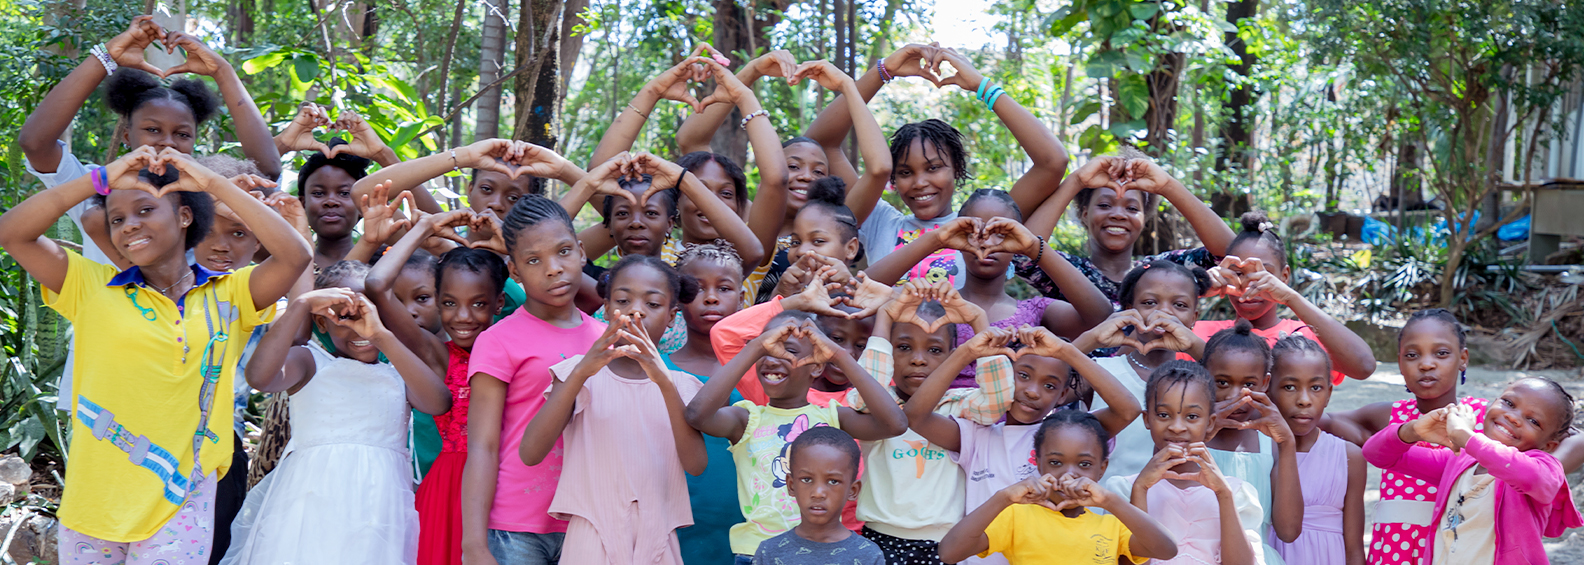 OUR CHILDREN ARE SAFE AND HEALTHY AMID HAITI’S CRISES